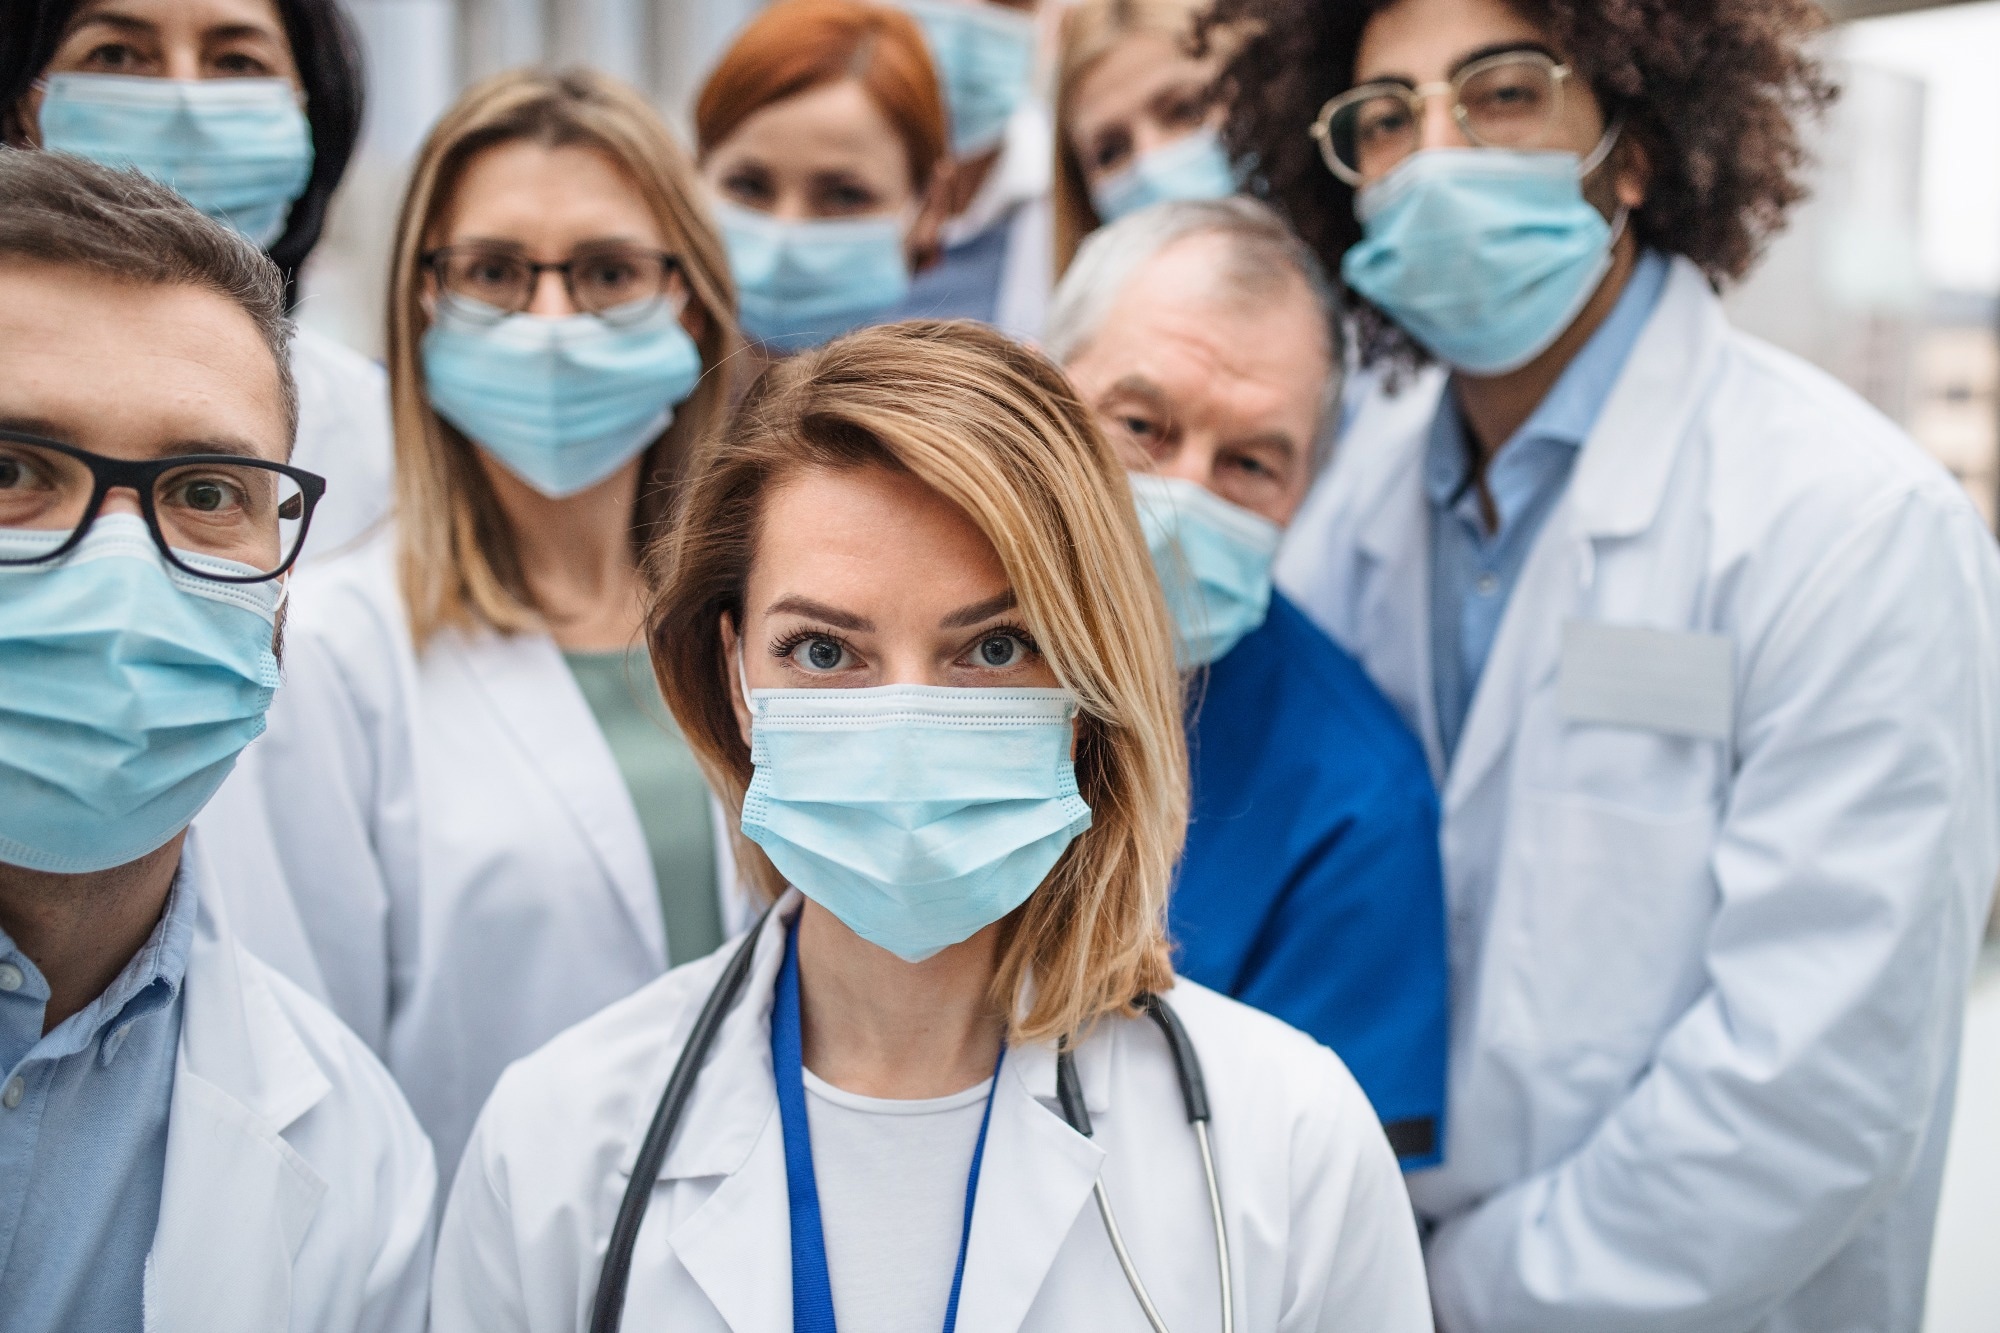 Study: For Patient Safety, It Is Not Time to Take Off Masks in Health Care Settings. Image Credit: GroundPicture/Shutterstock.com